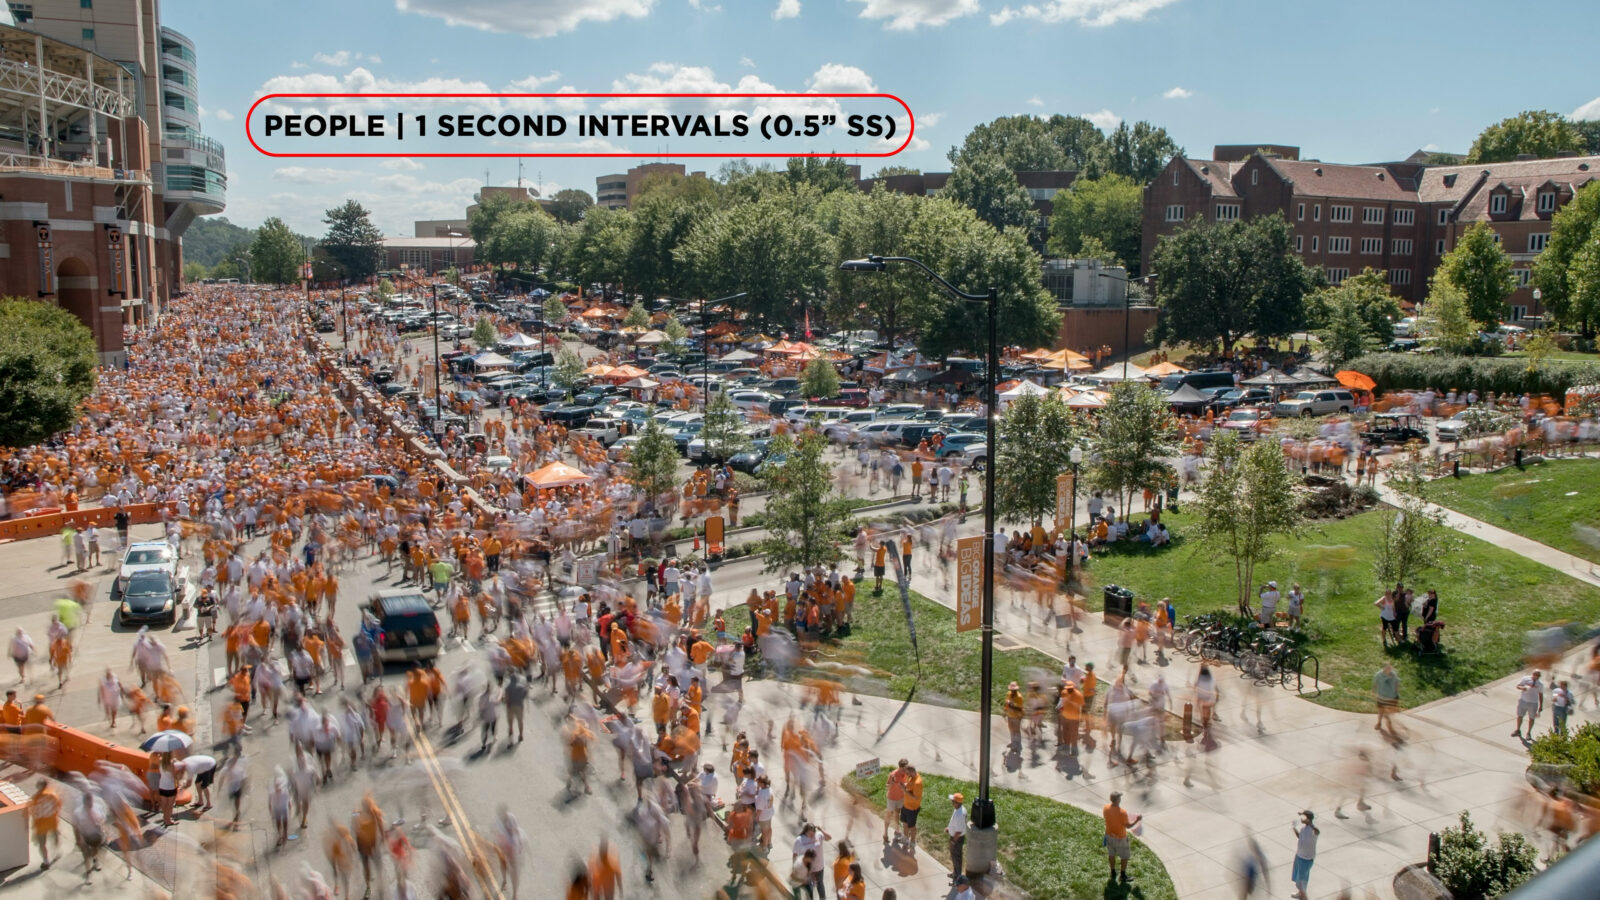 Crowds of people are moving fast - you want to keep that timelapse interval short. Image source: Drew Geraci / MZed